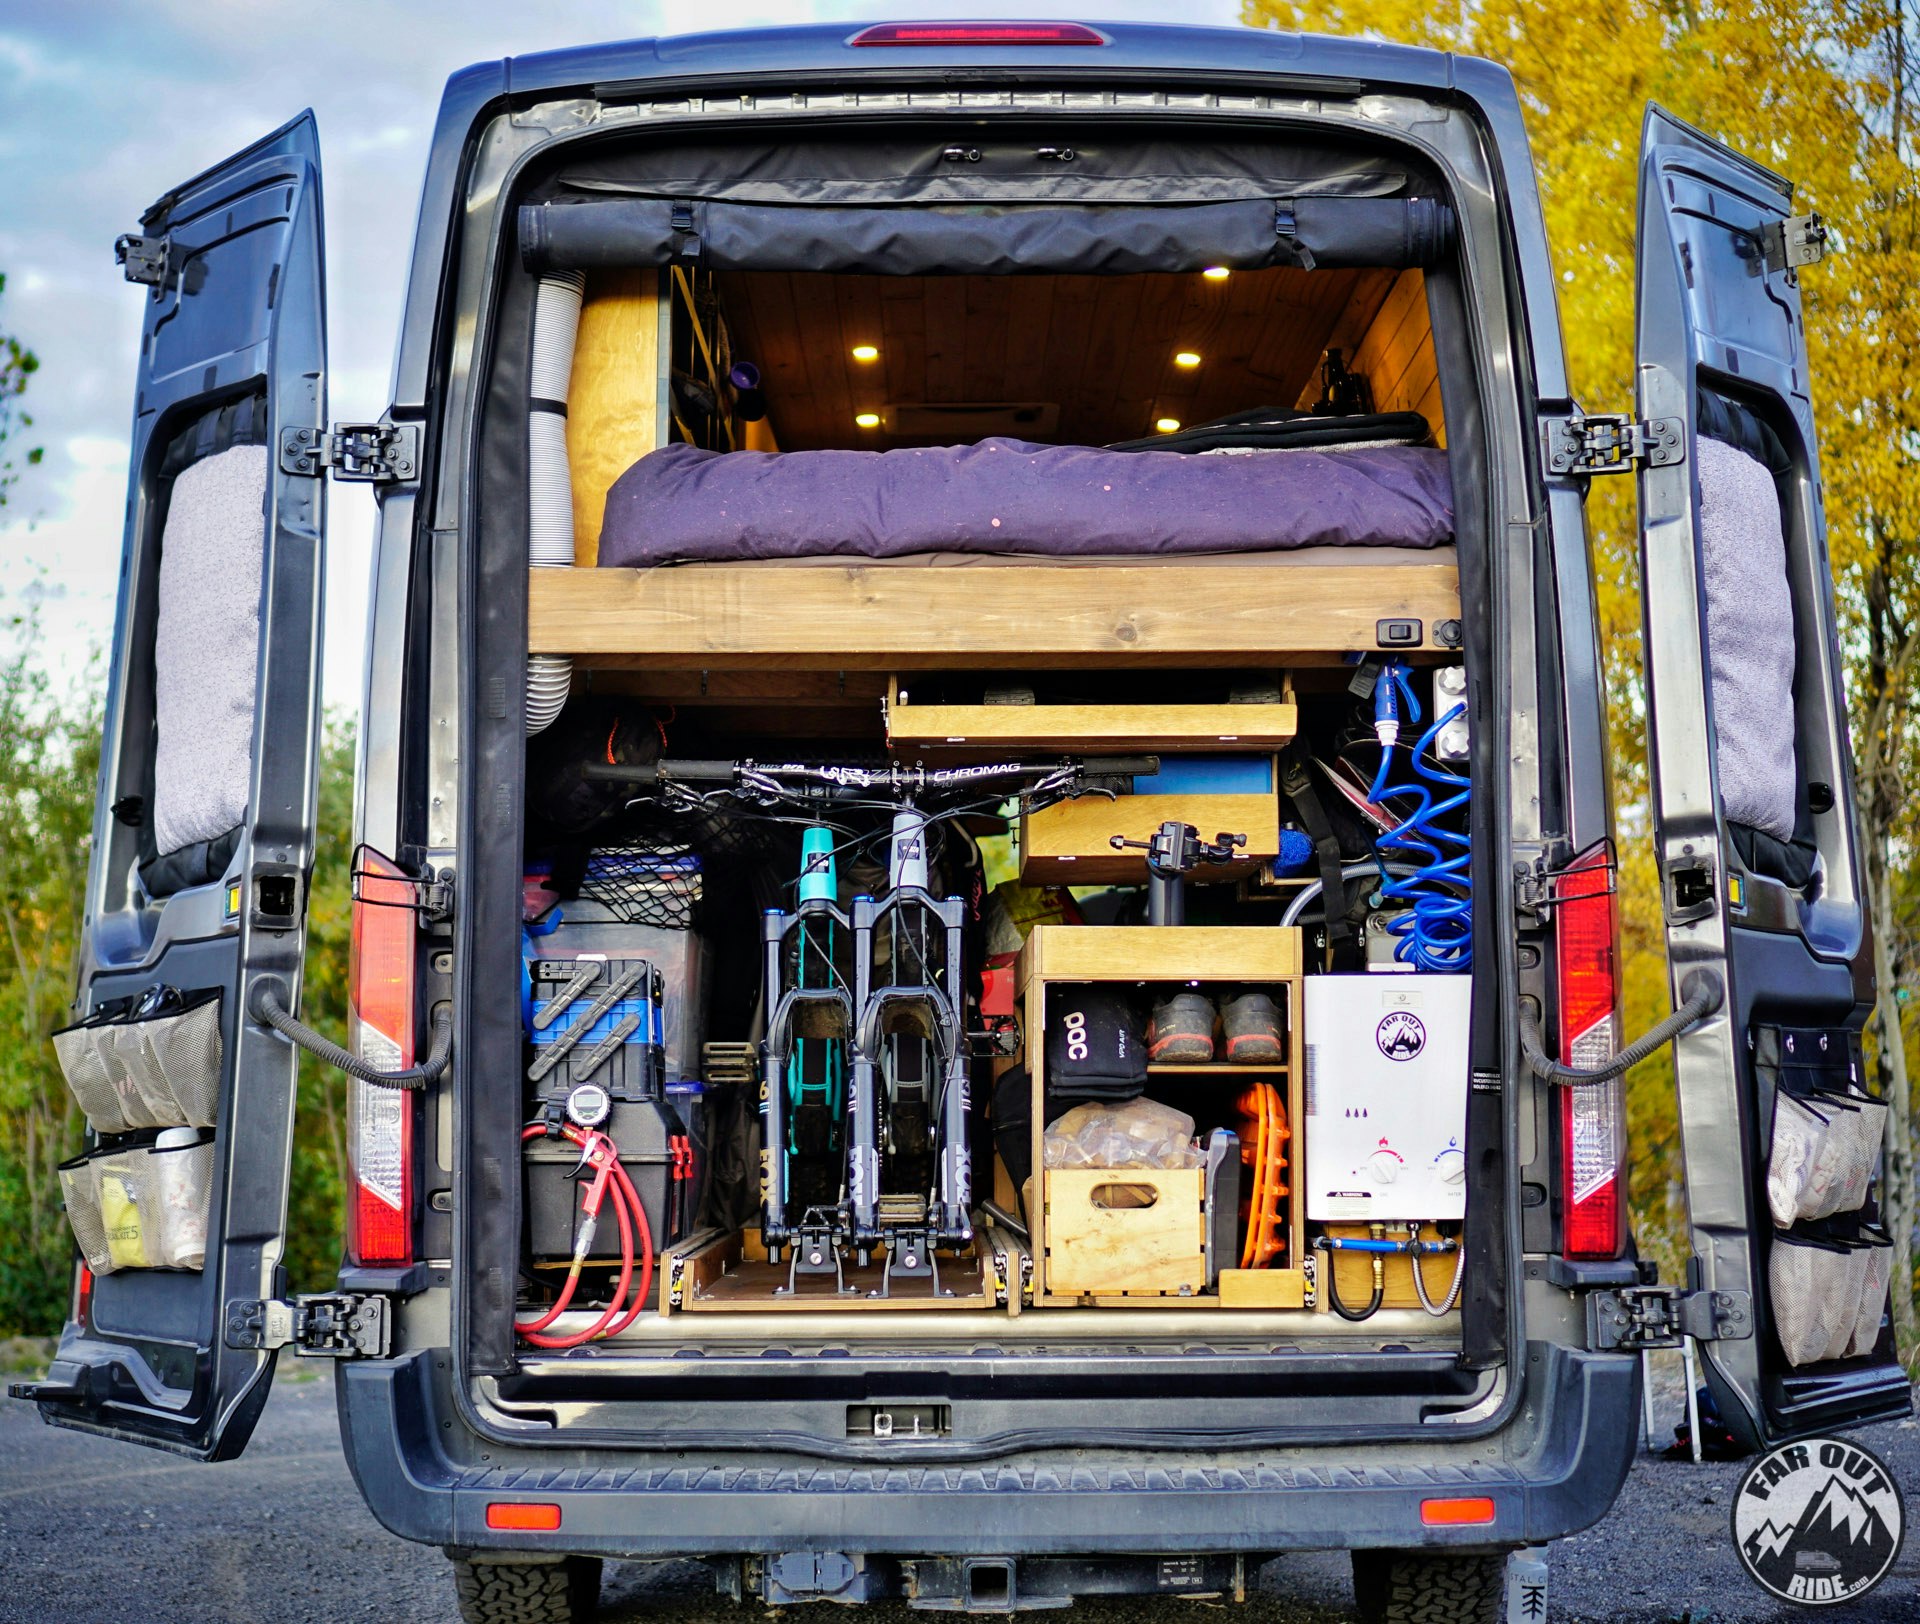 The vehicle acts as a home on wheels and has been configured to fit two mountain bikes © FarOutRide